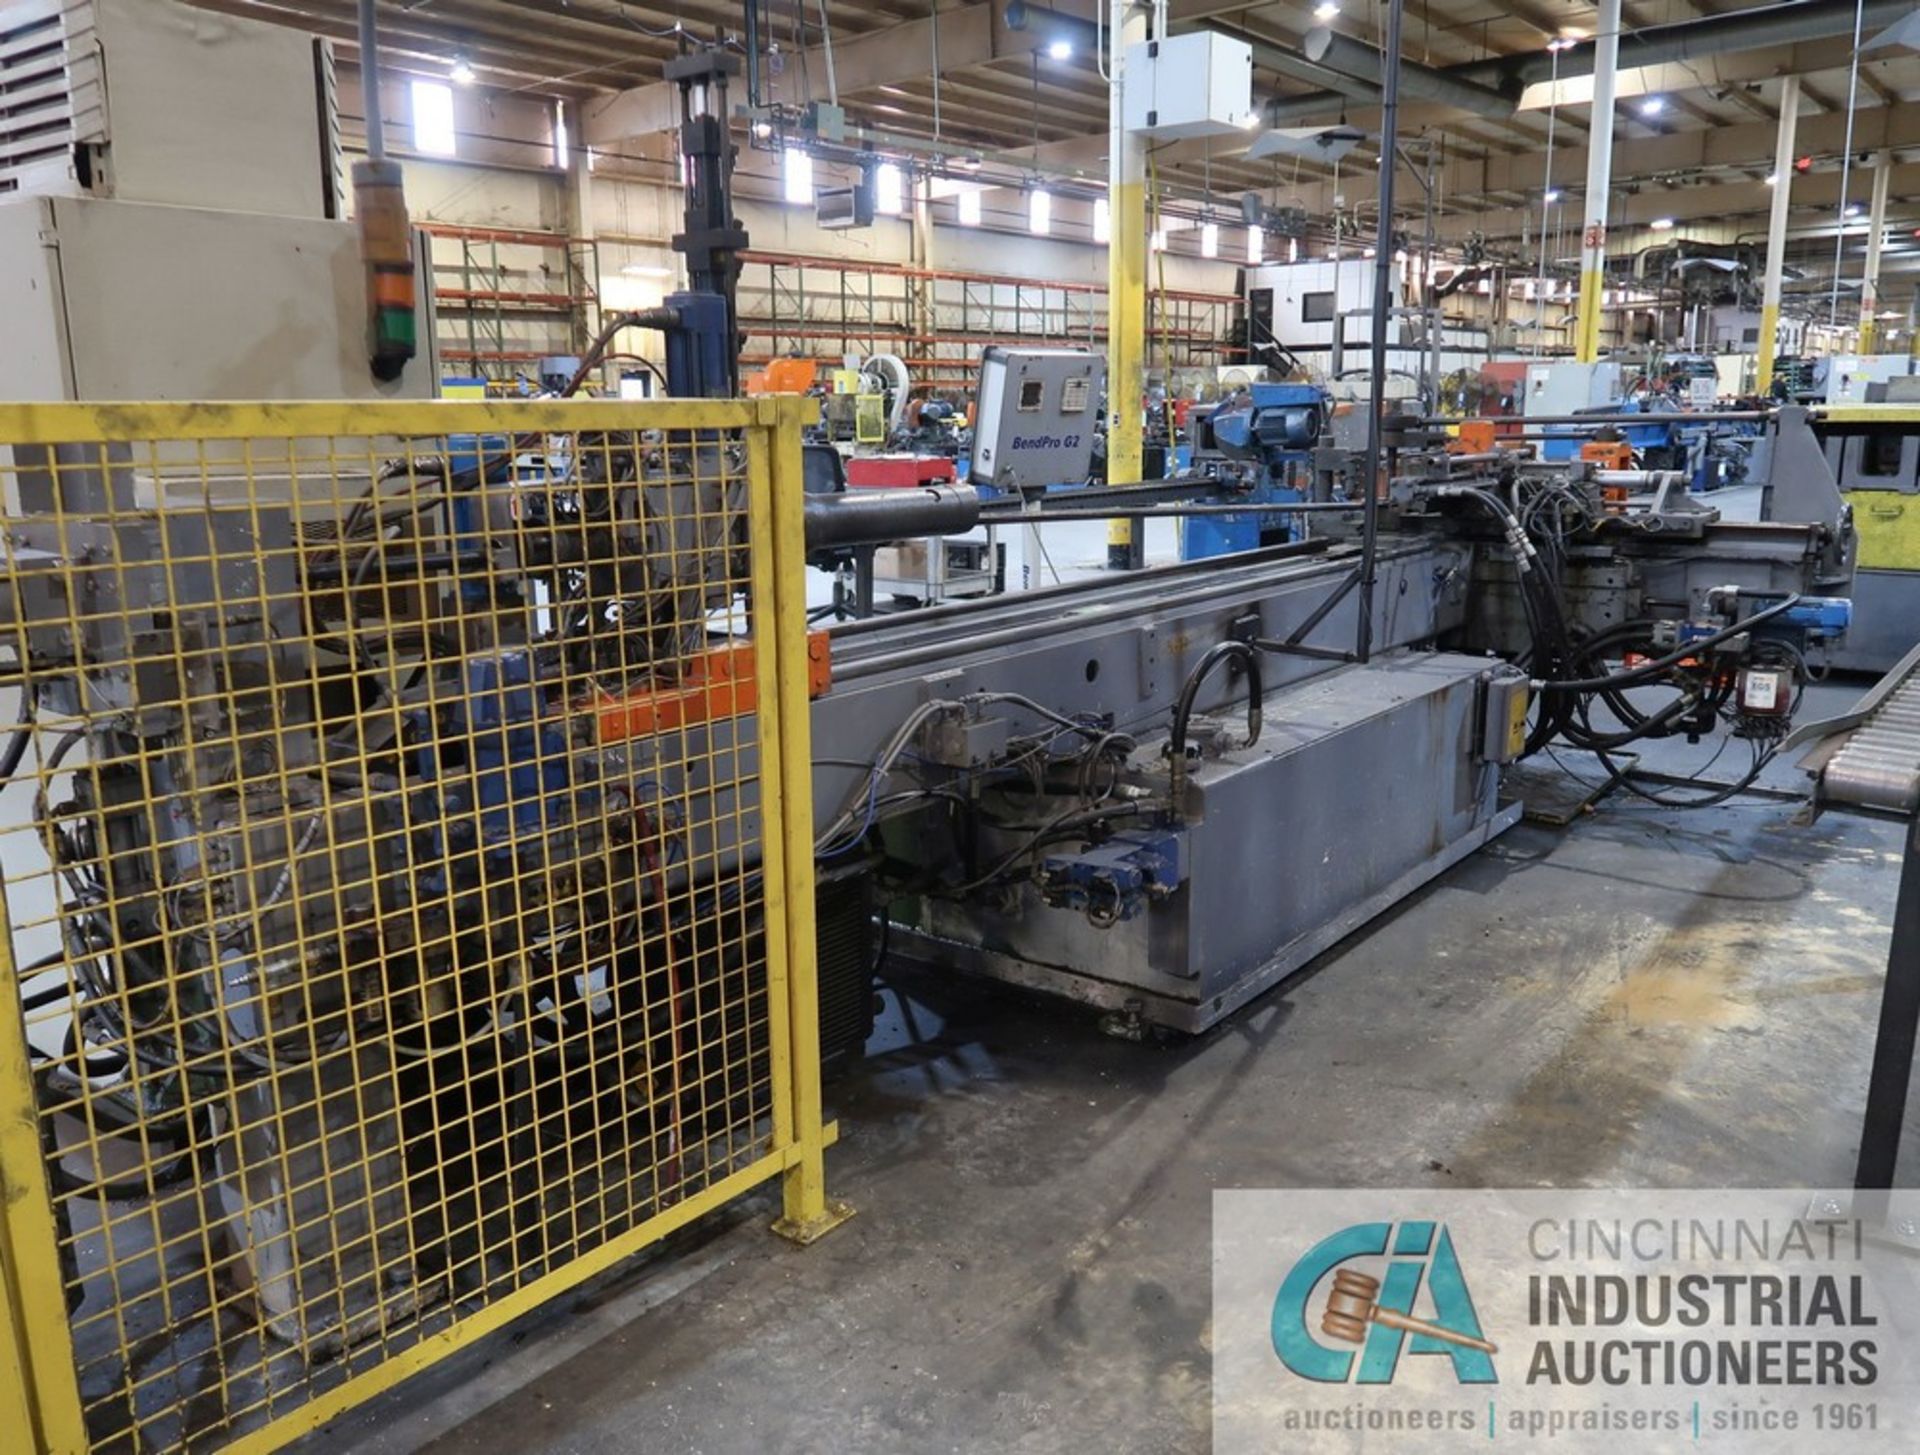 3" ADDISON DB76-ST3 MULTI-STACK 5-AXIS CNC HYDRAULIC TUBE BENDER; S/N 9952, ASSET NO. AB-14, 3" - Image 5 of 15